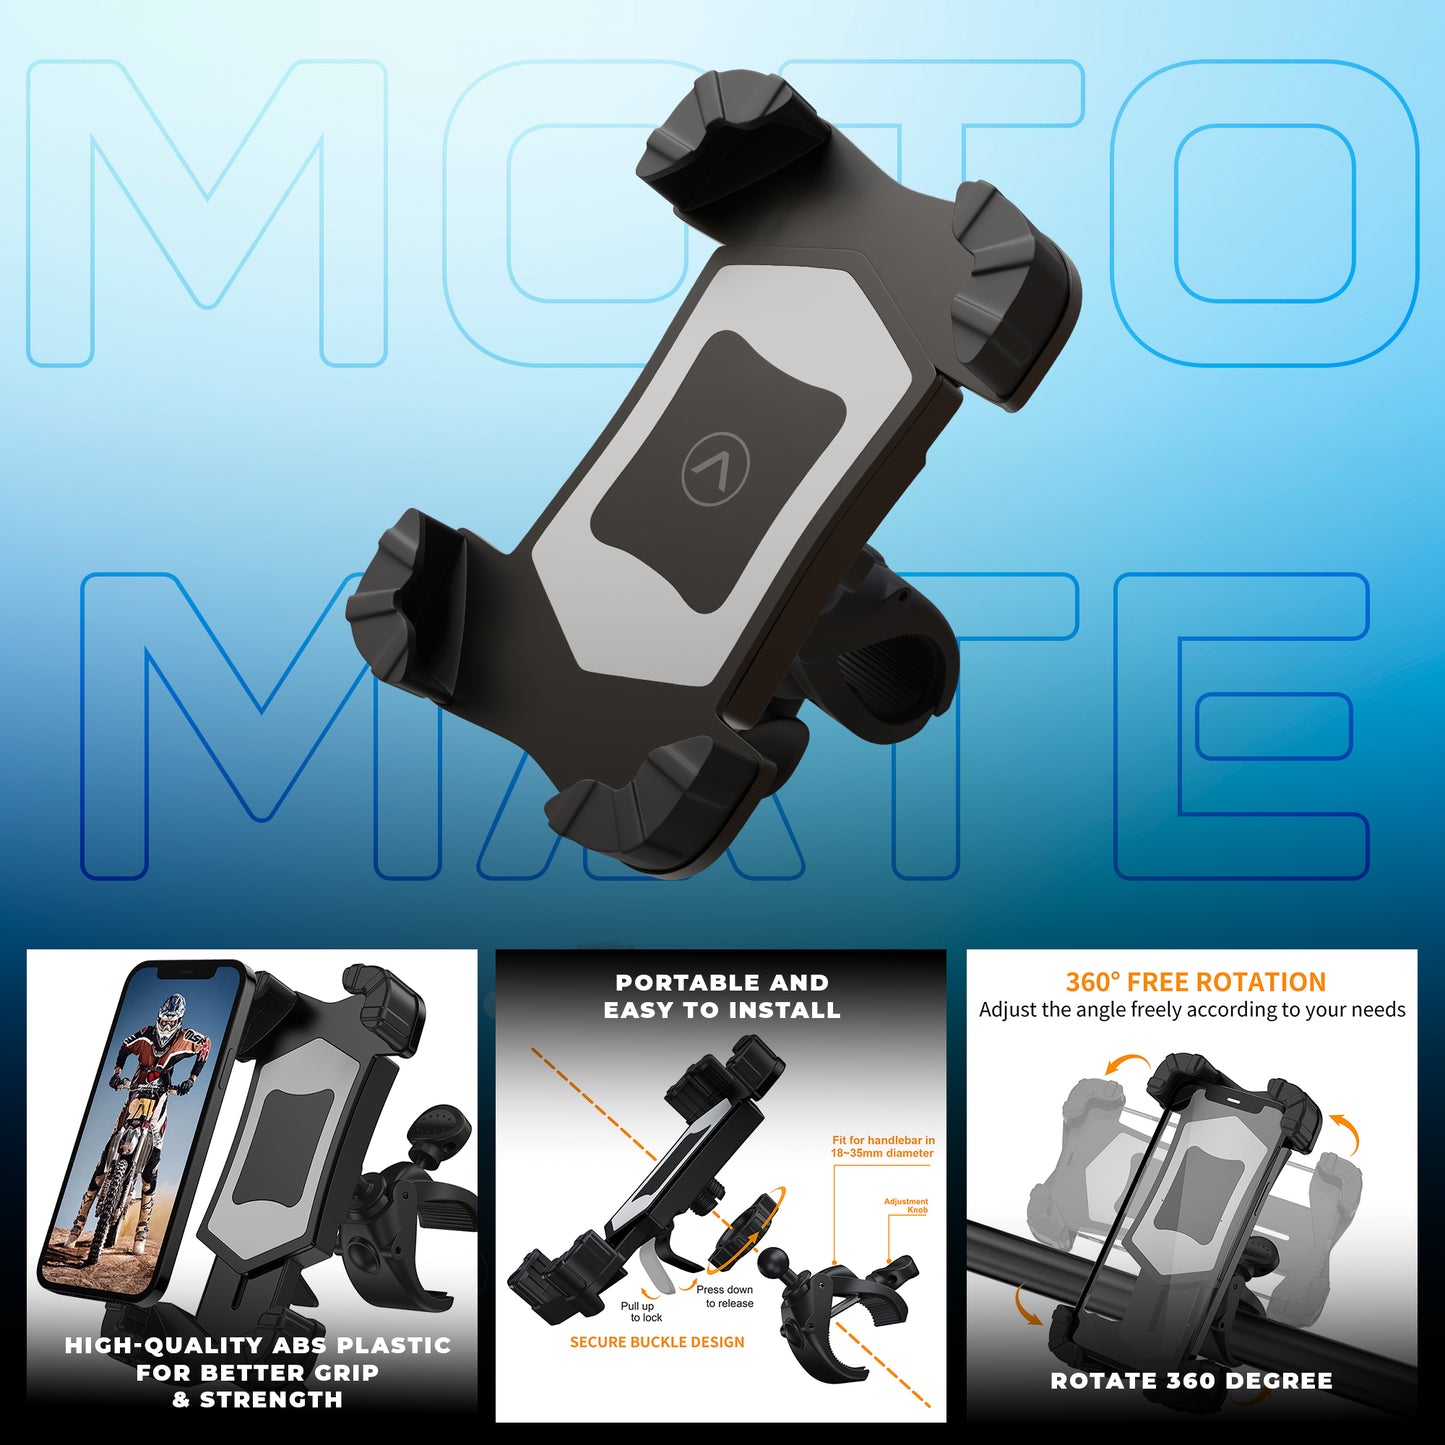 JCBL ACCESSORIES Bike Mobile Holder, High Stablized Design, Shock-Absorbing Silicone Pads, Strong Grip, Metallic Frame for 4.7 to 6.7 inch Mobiles (SL01) | PORTABLE AND i] EASY TO INSTALL Adjust the angle freely according to your needs a b a | yh [| (54 ) . bali 4 4 f 5 [| YEP i Ni y¥.4 y \ | 4 A Sa df — d Frum | Cp « nap / NY "HIGH-QUALITY AB!  FOR BETTER SRIP ROTATE 360 DEGREE